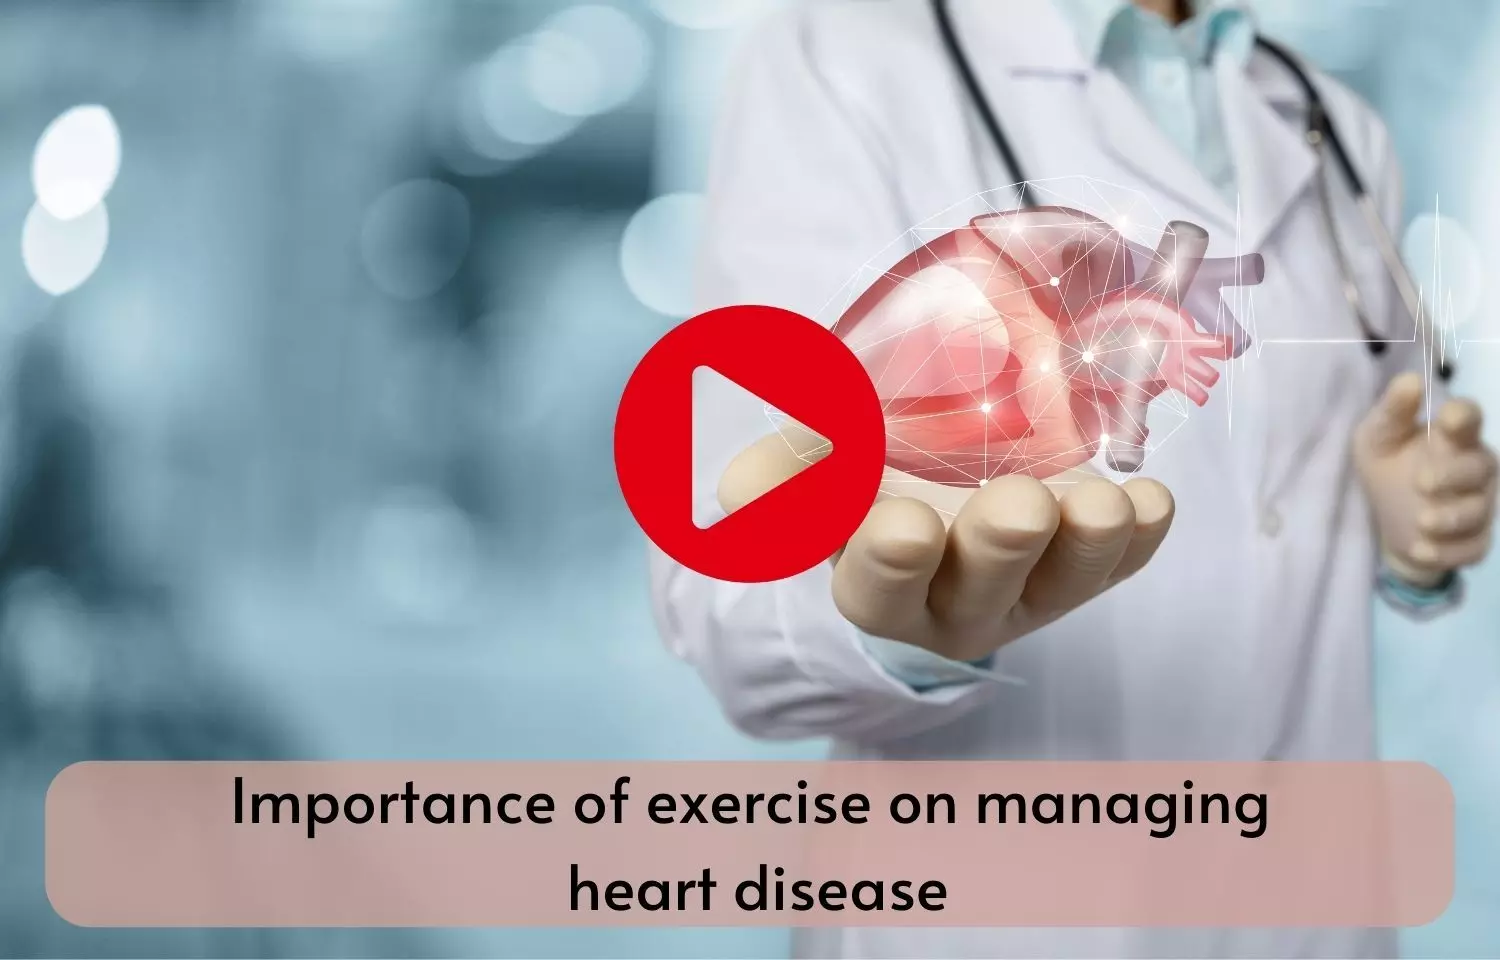 Importance of exercise on managing heart disease